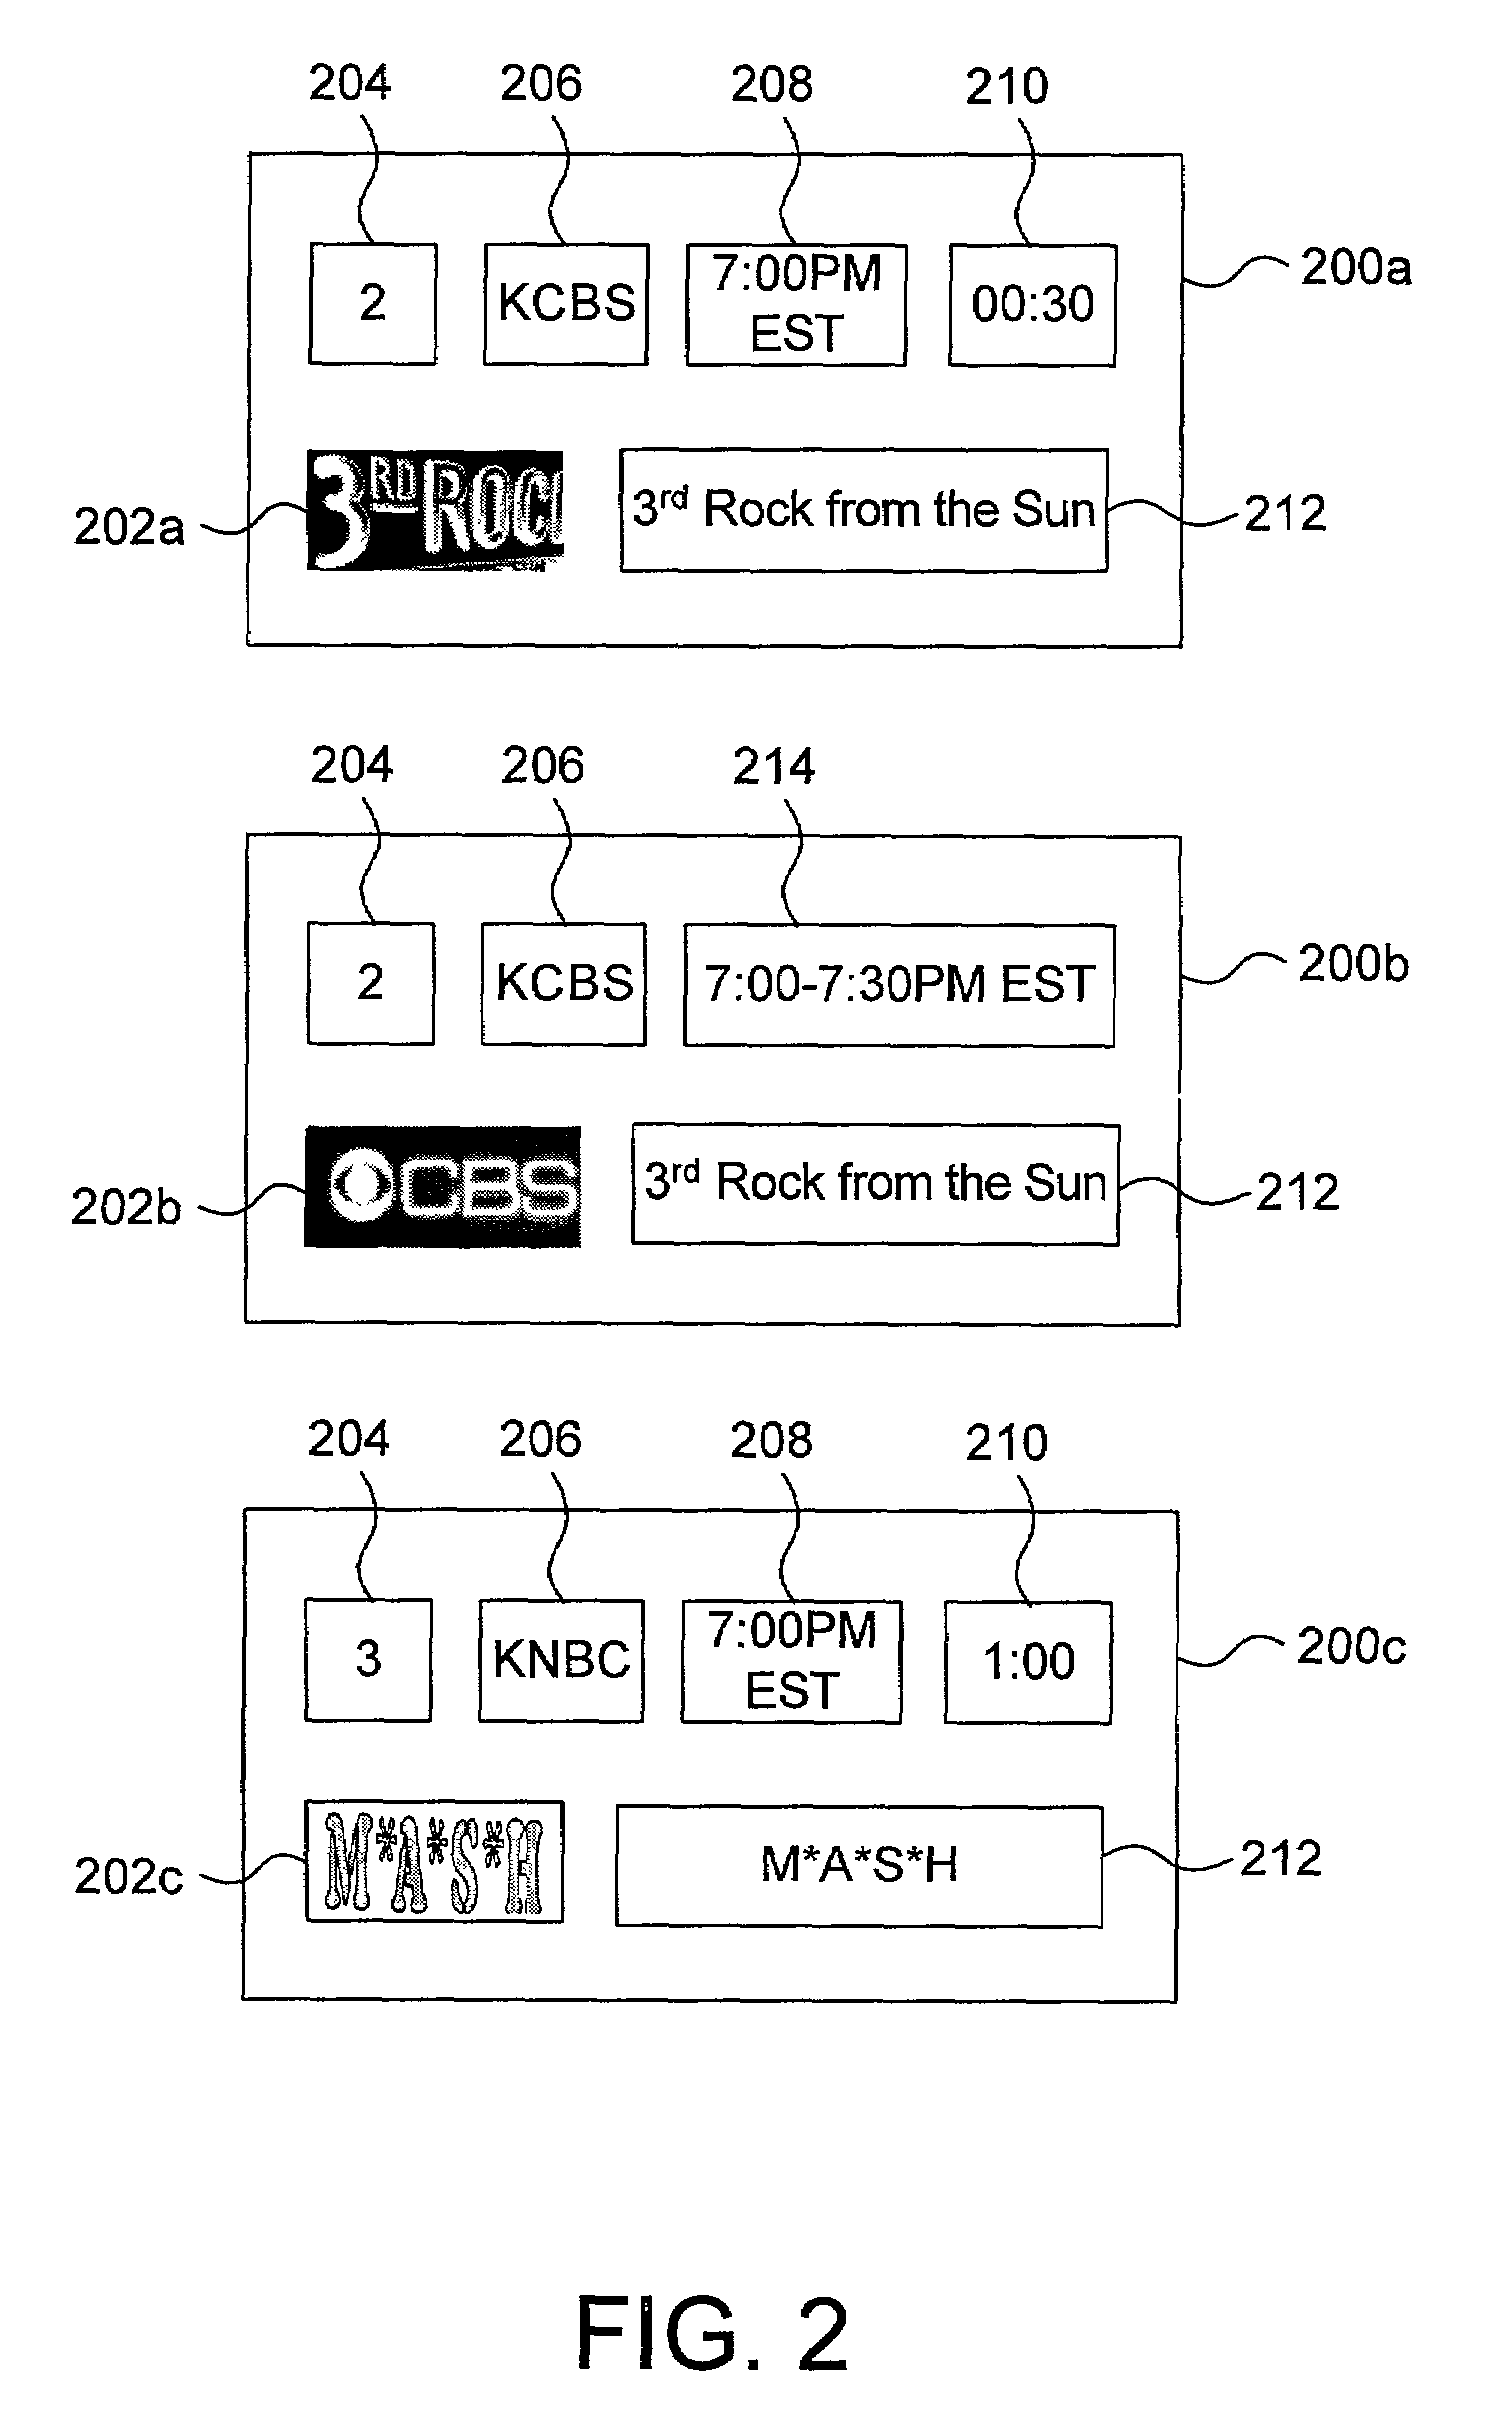 System and method for focused navigation within a user interface